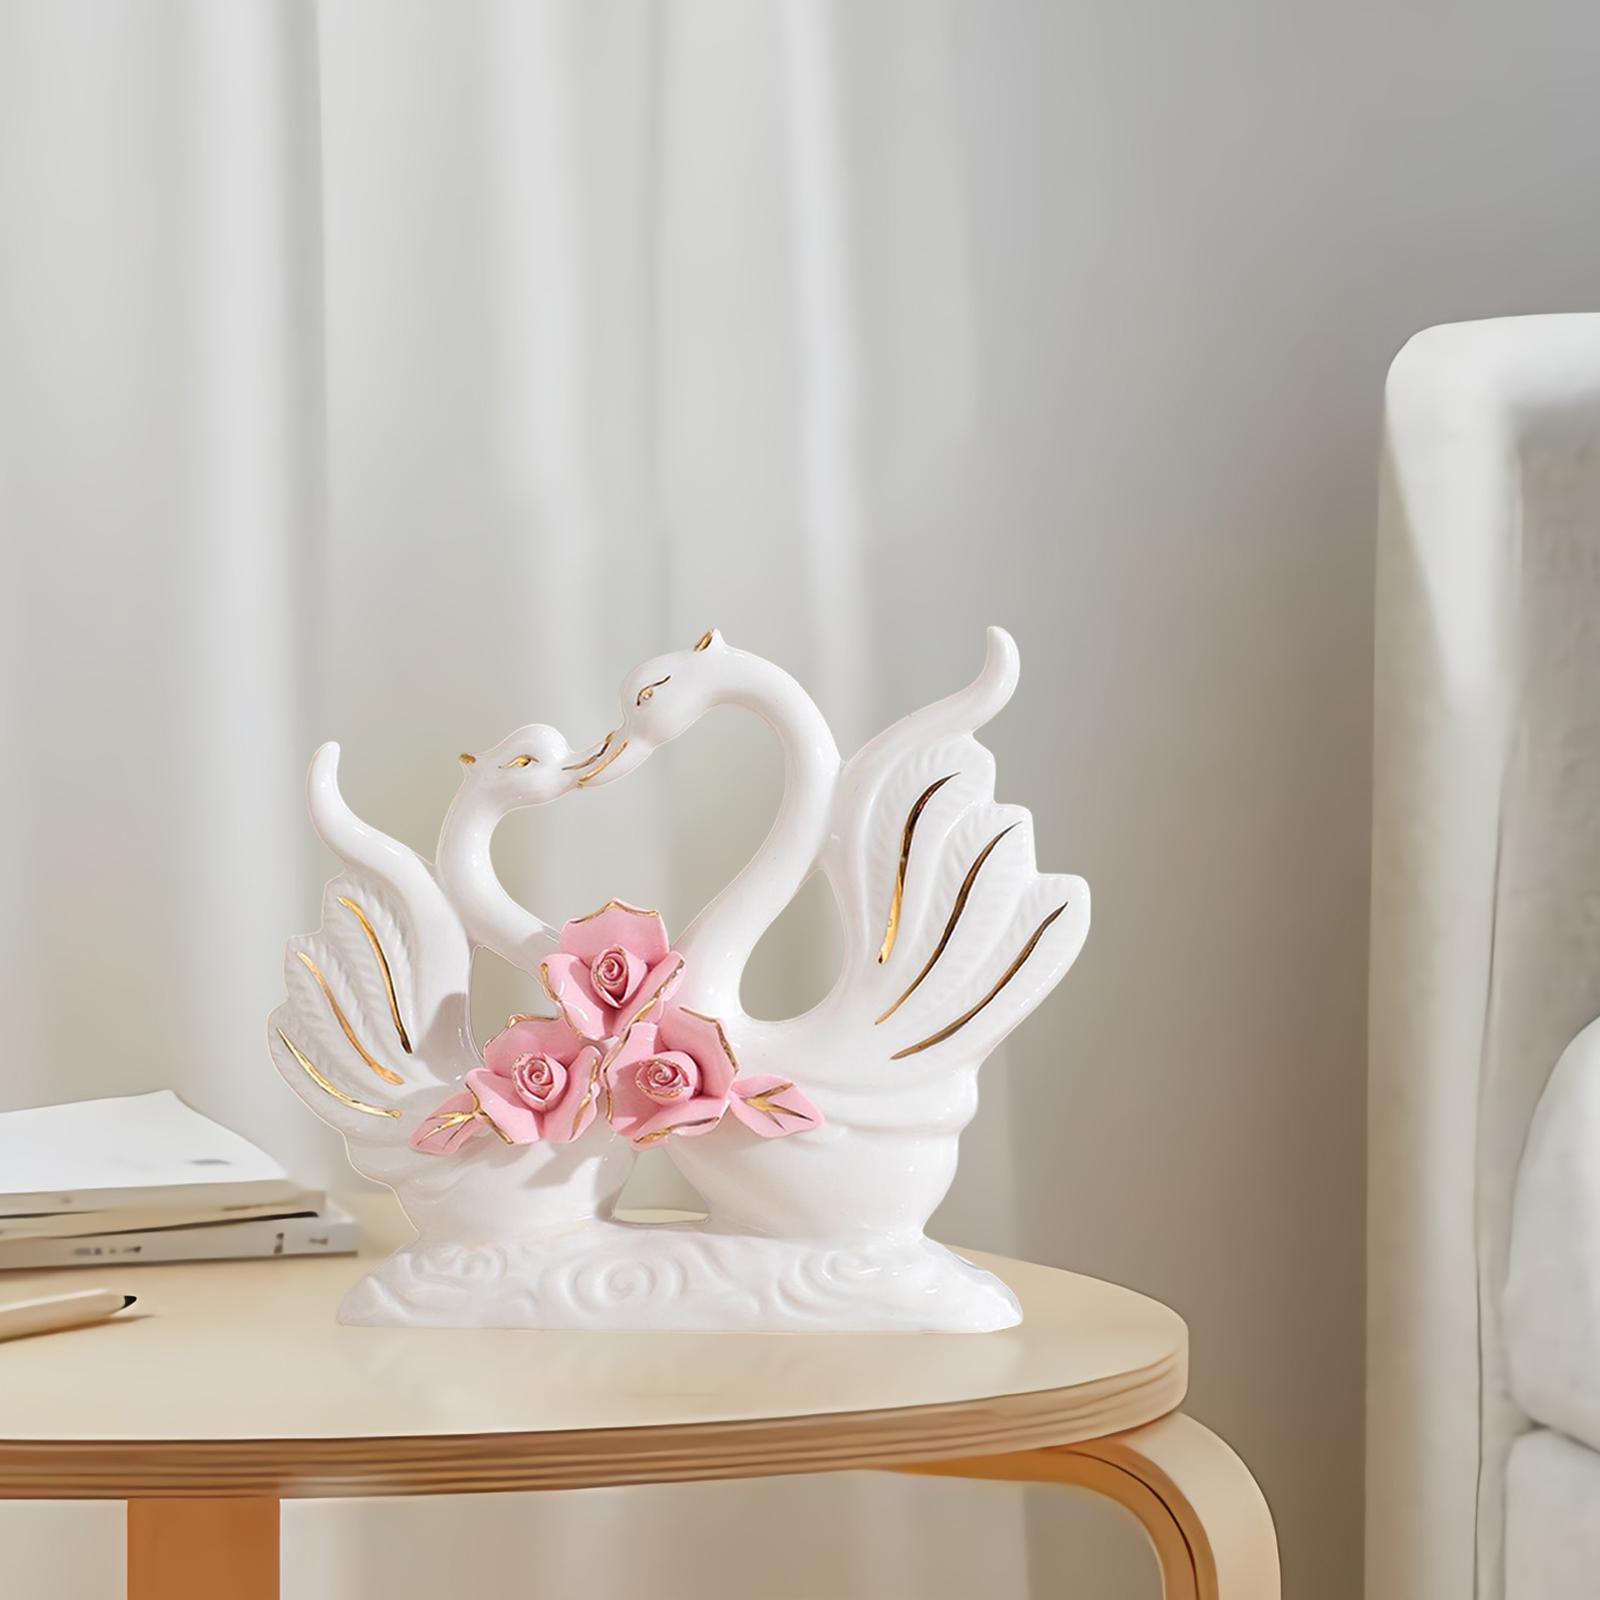 Swan Figurines Ornament Farmhouse Centerpiece Bedroom Home Office Party Pink 